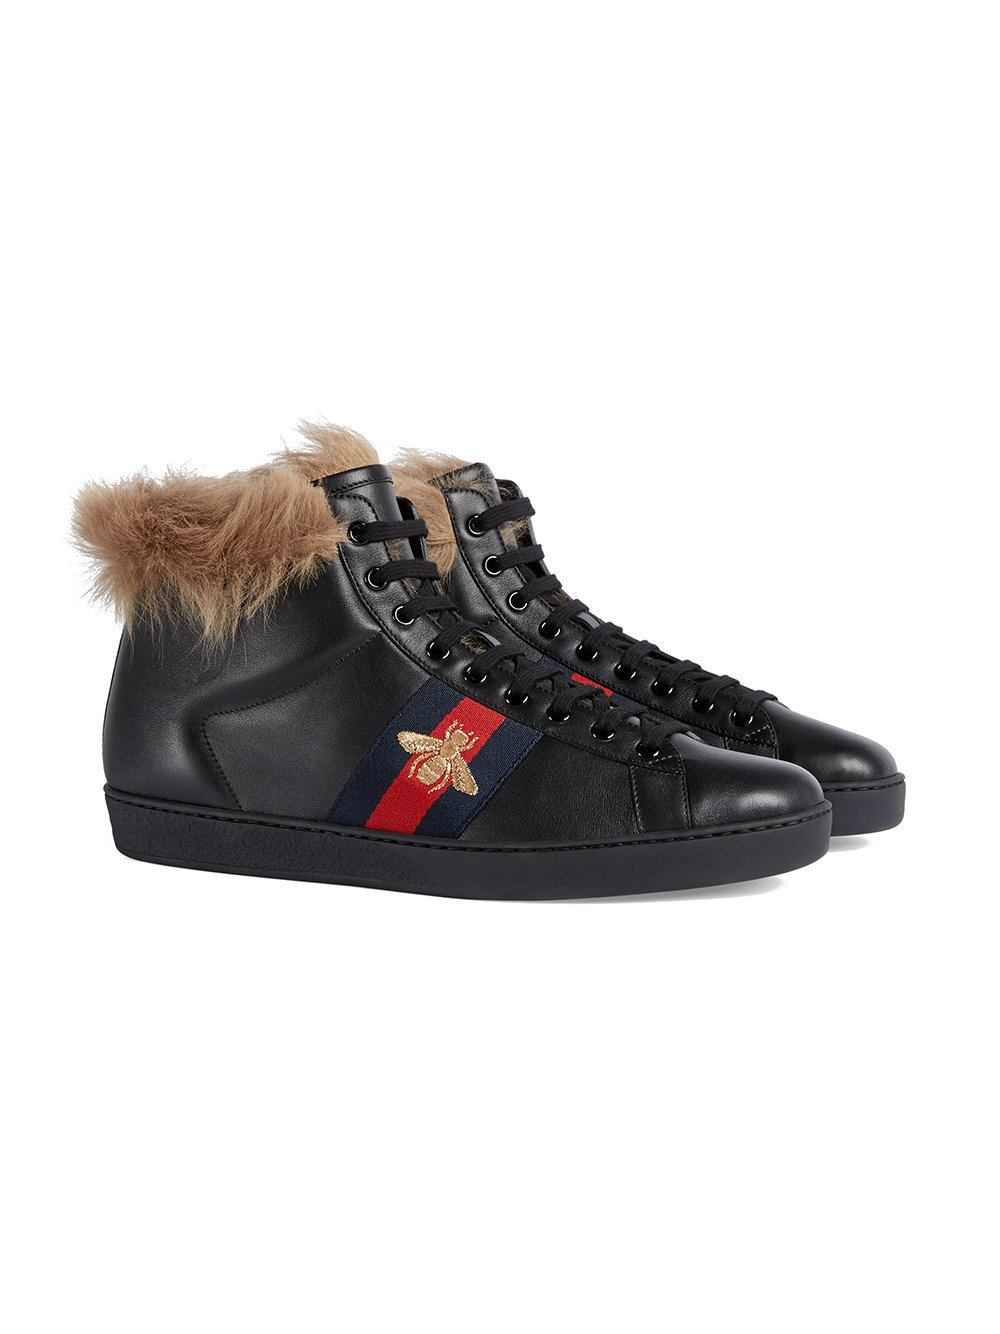 Gucci Ace High Top Sneaker With Fur, $910  | Lookastic